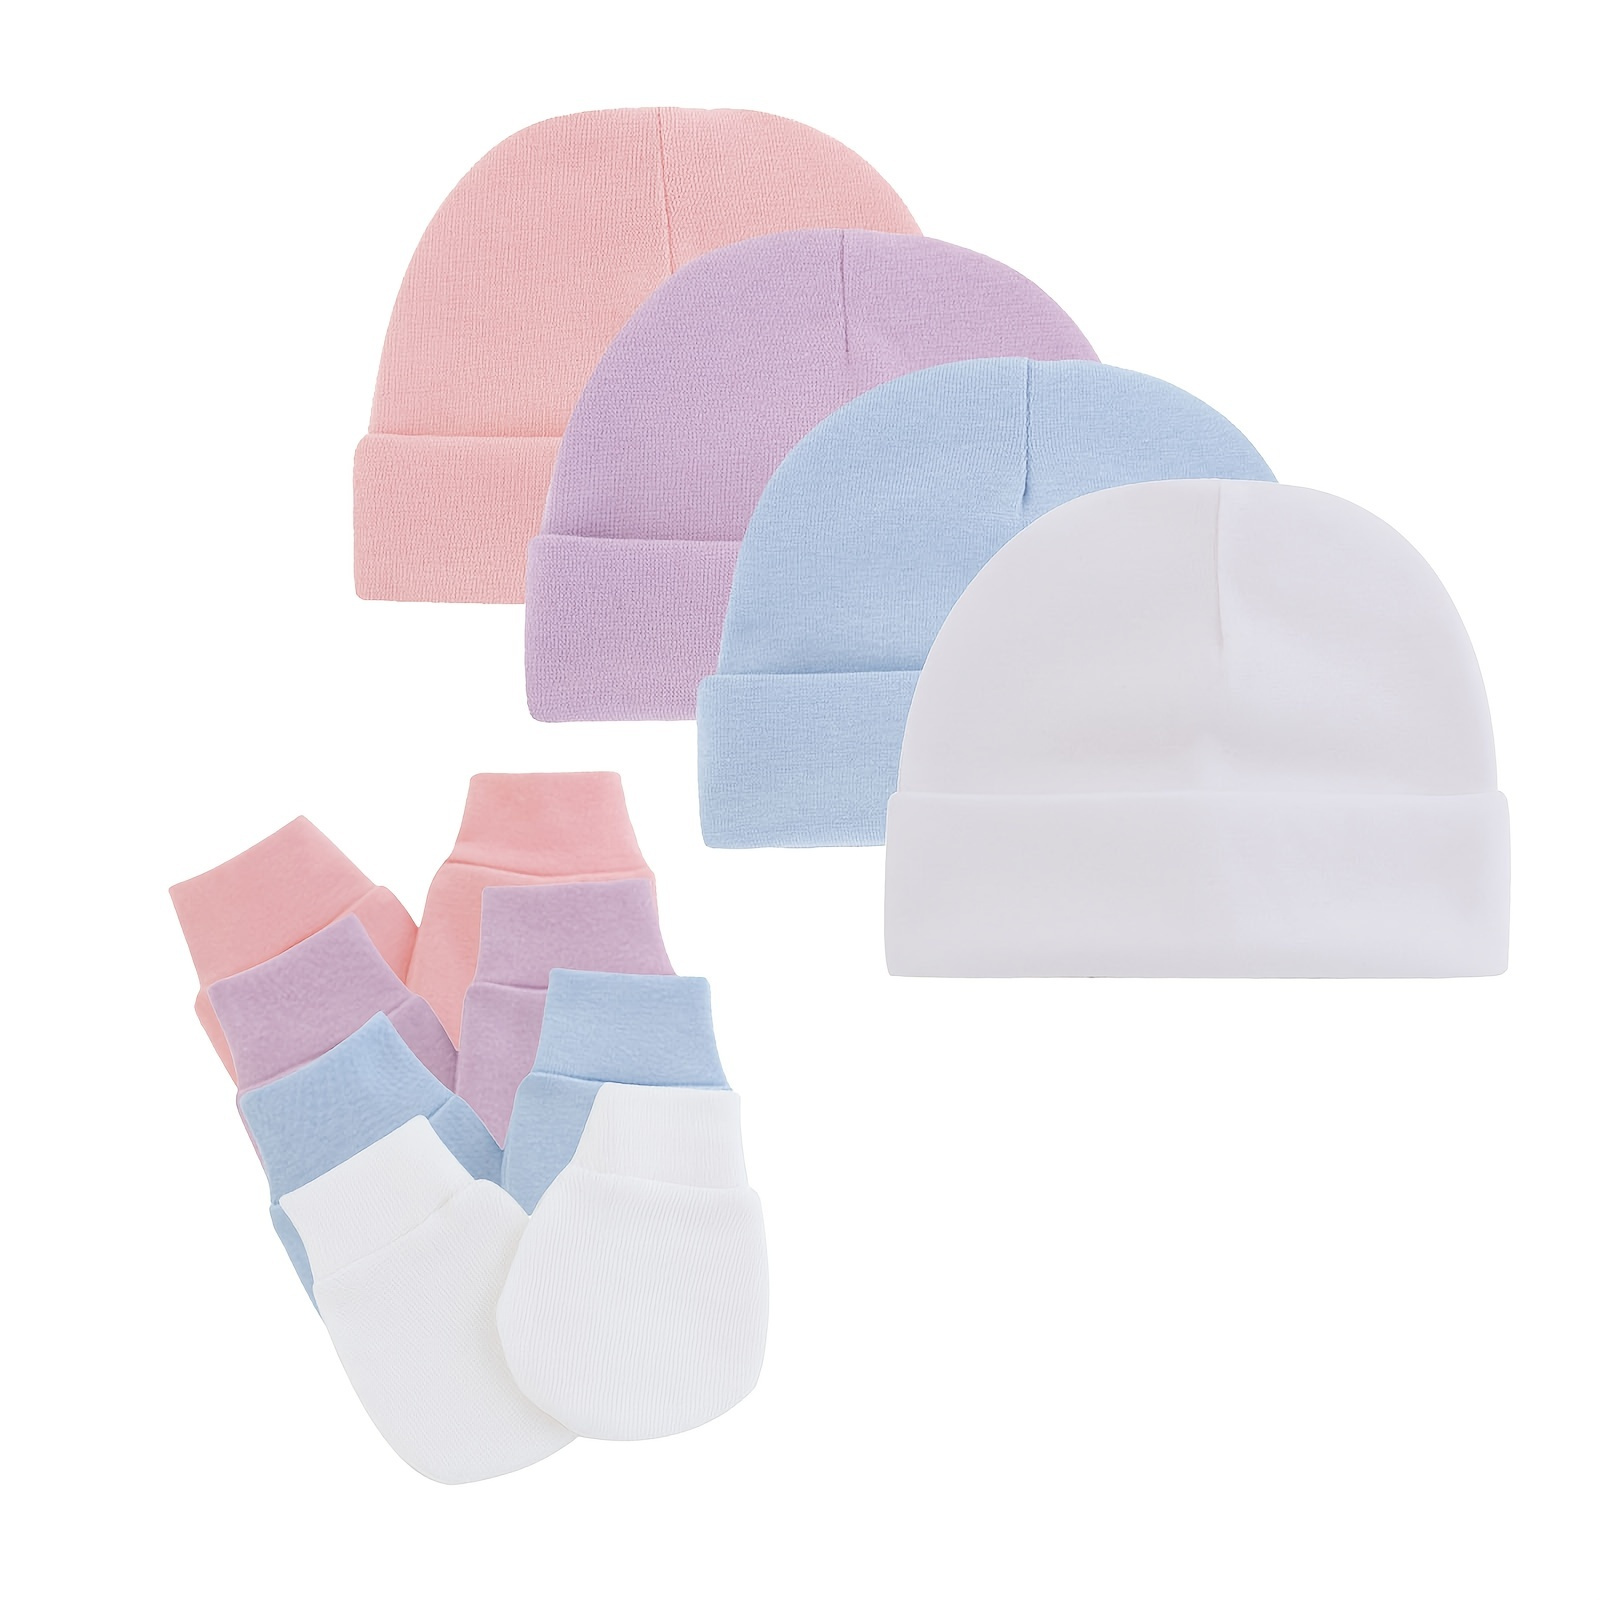 

4set Newborn Infant Hospital Hat Mittens Set, Cotton Beanie Cap And Gloves For Baby Girls And Boys, Ideal Choice For Gifts